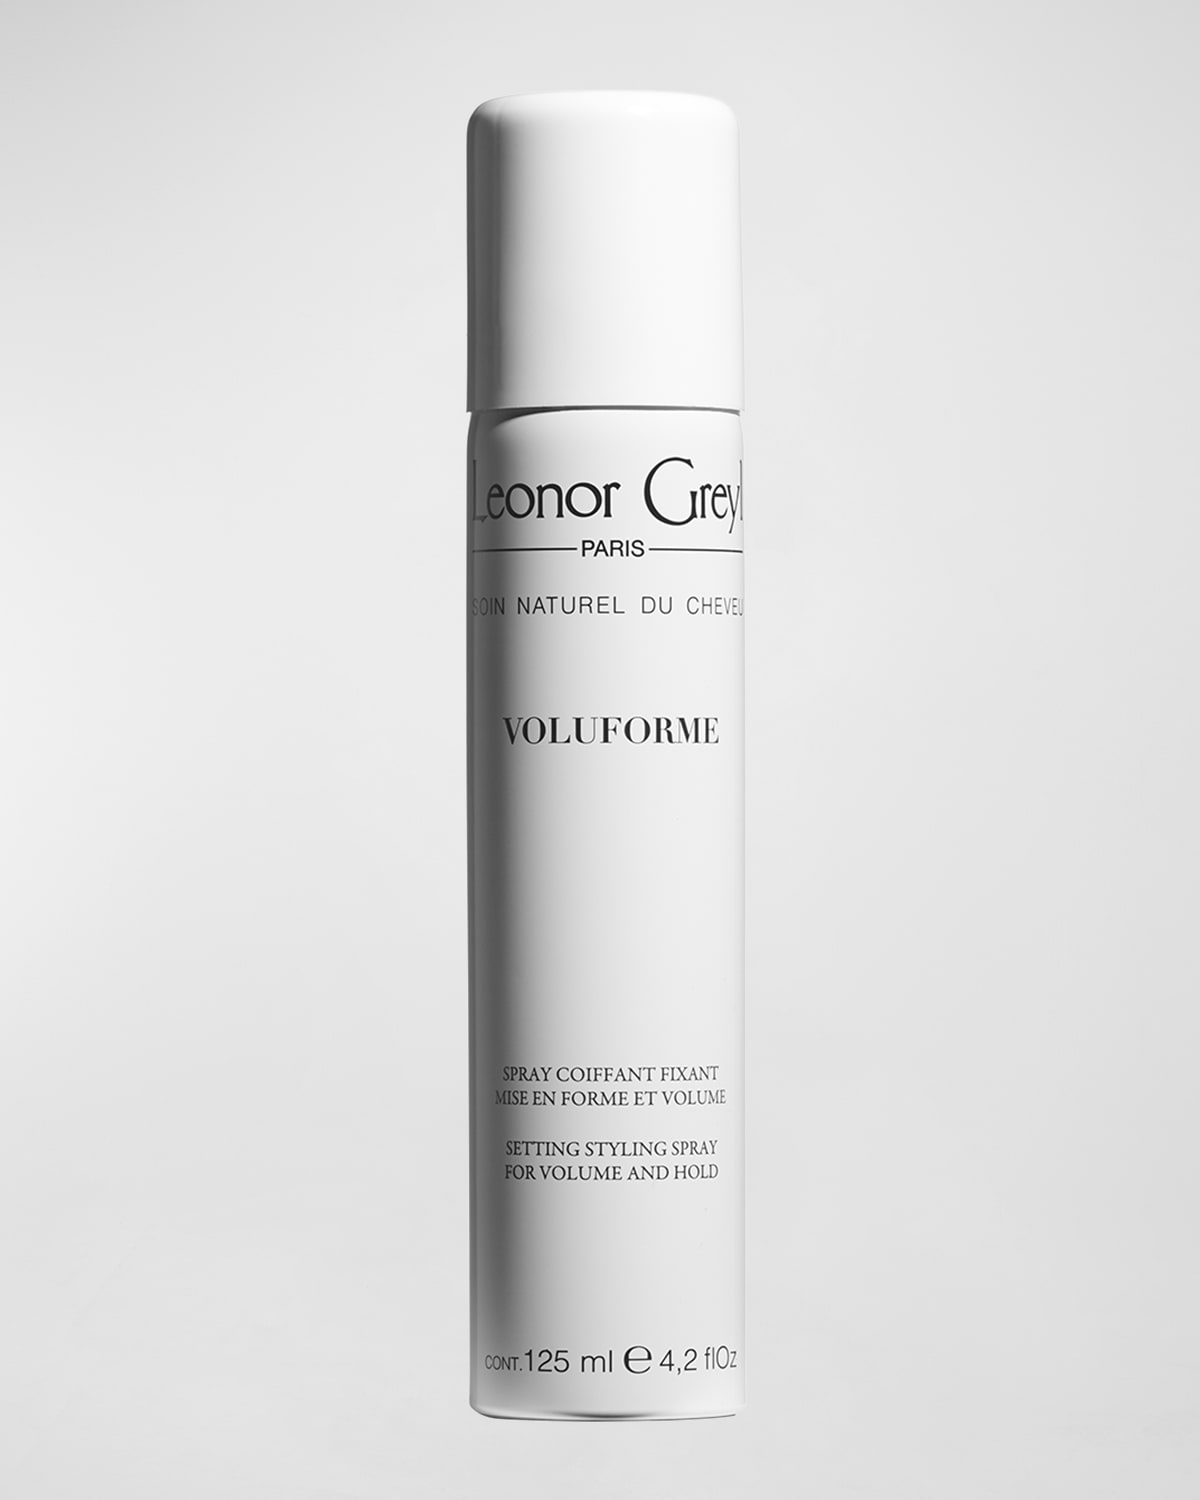 Leonor Greyl Voluforme (Styling Spray for Volume and Hold), 4.2 oz./ 125 mL